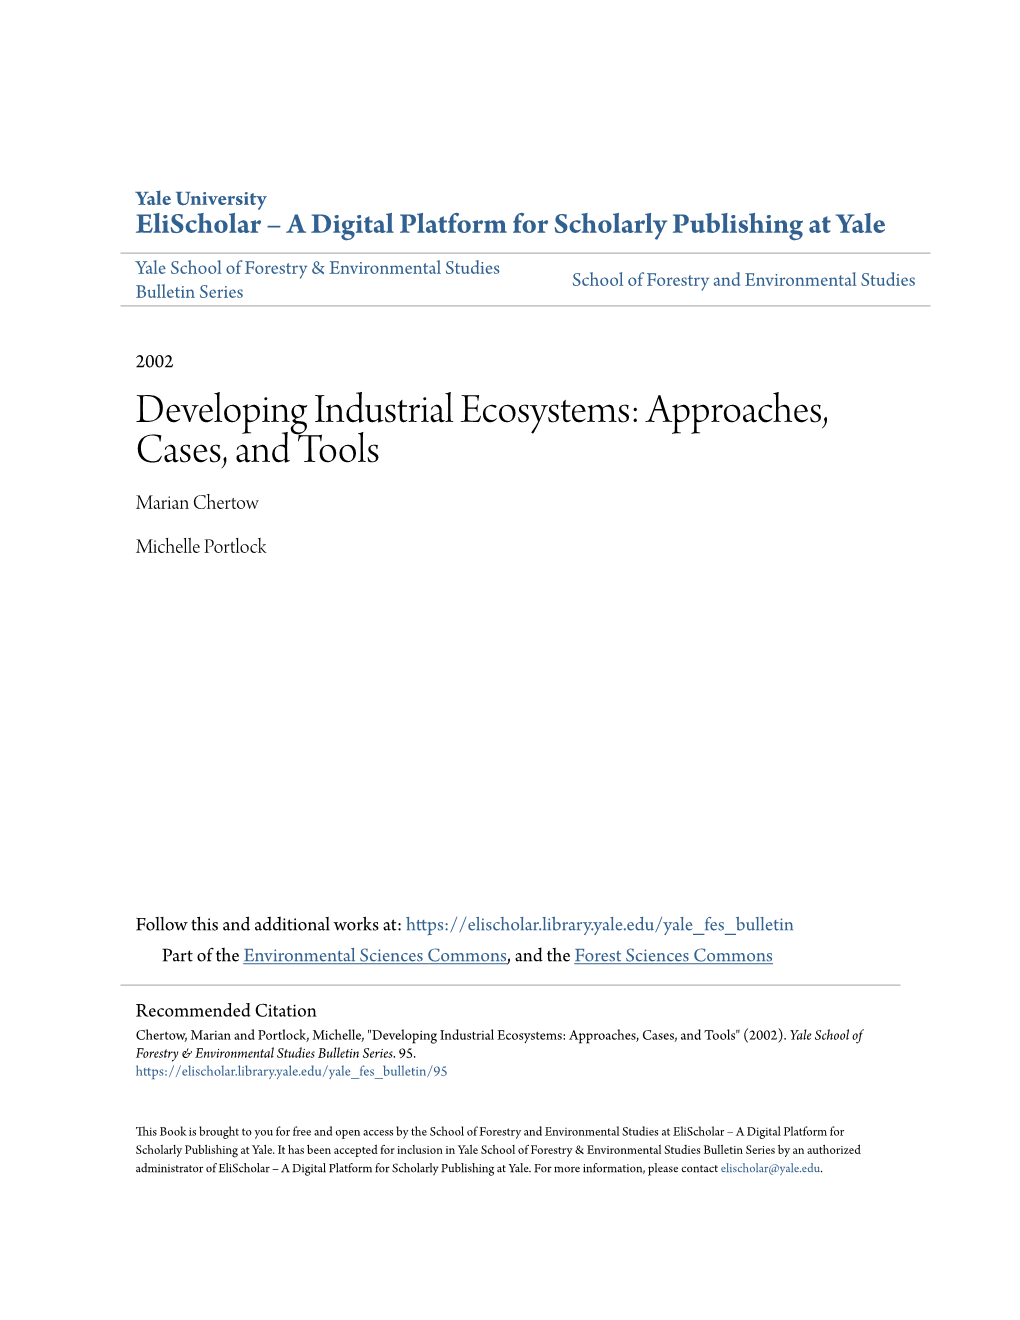 Developing Industrial Ecosystems: Approaches, Cases, and Tools Marian Chertow